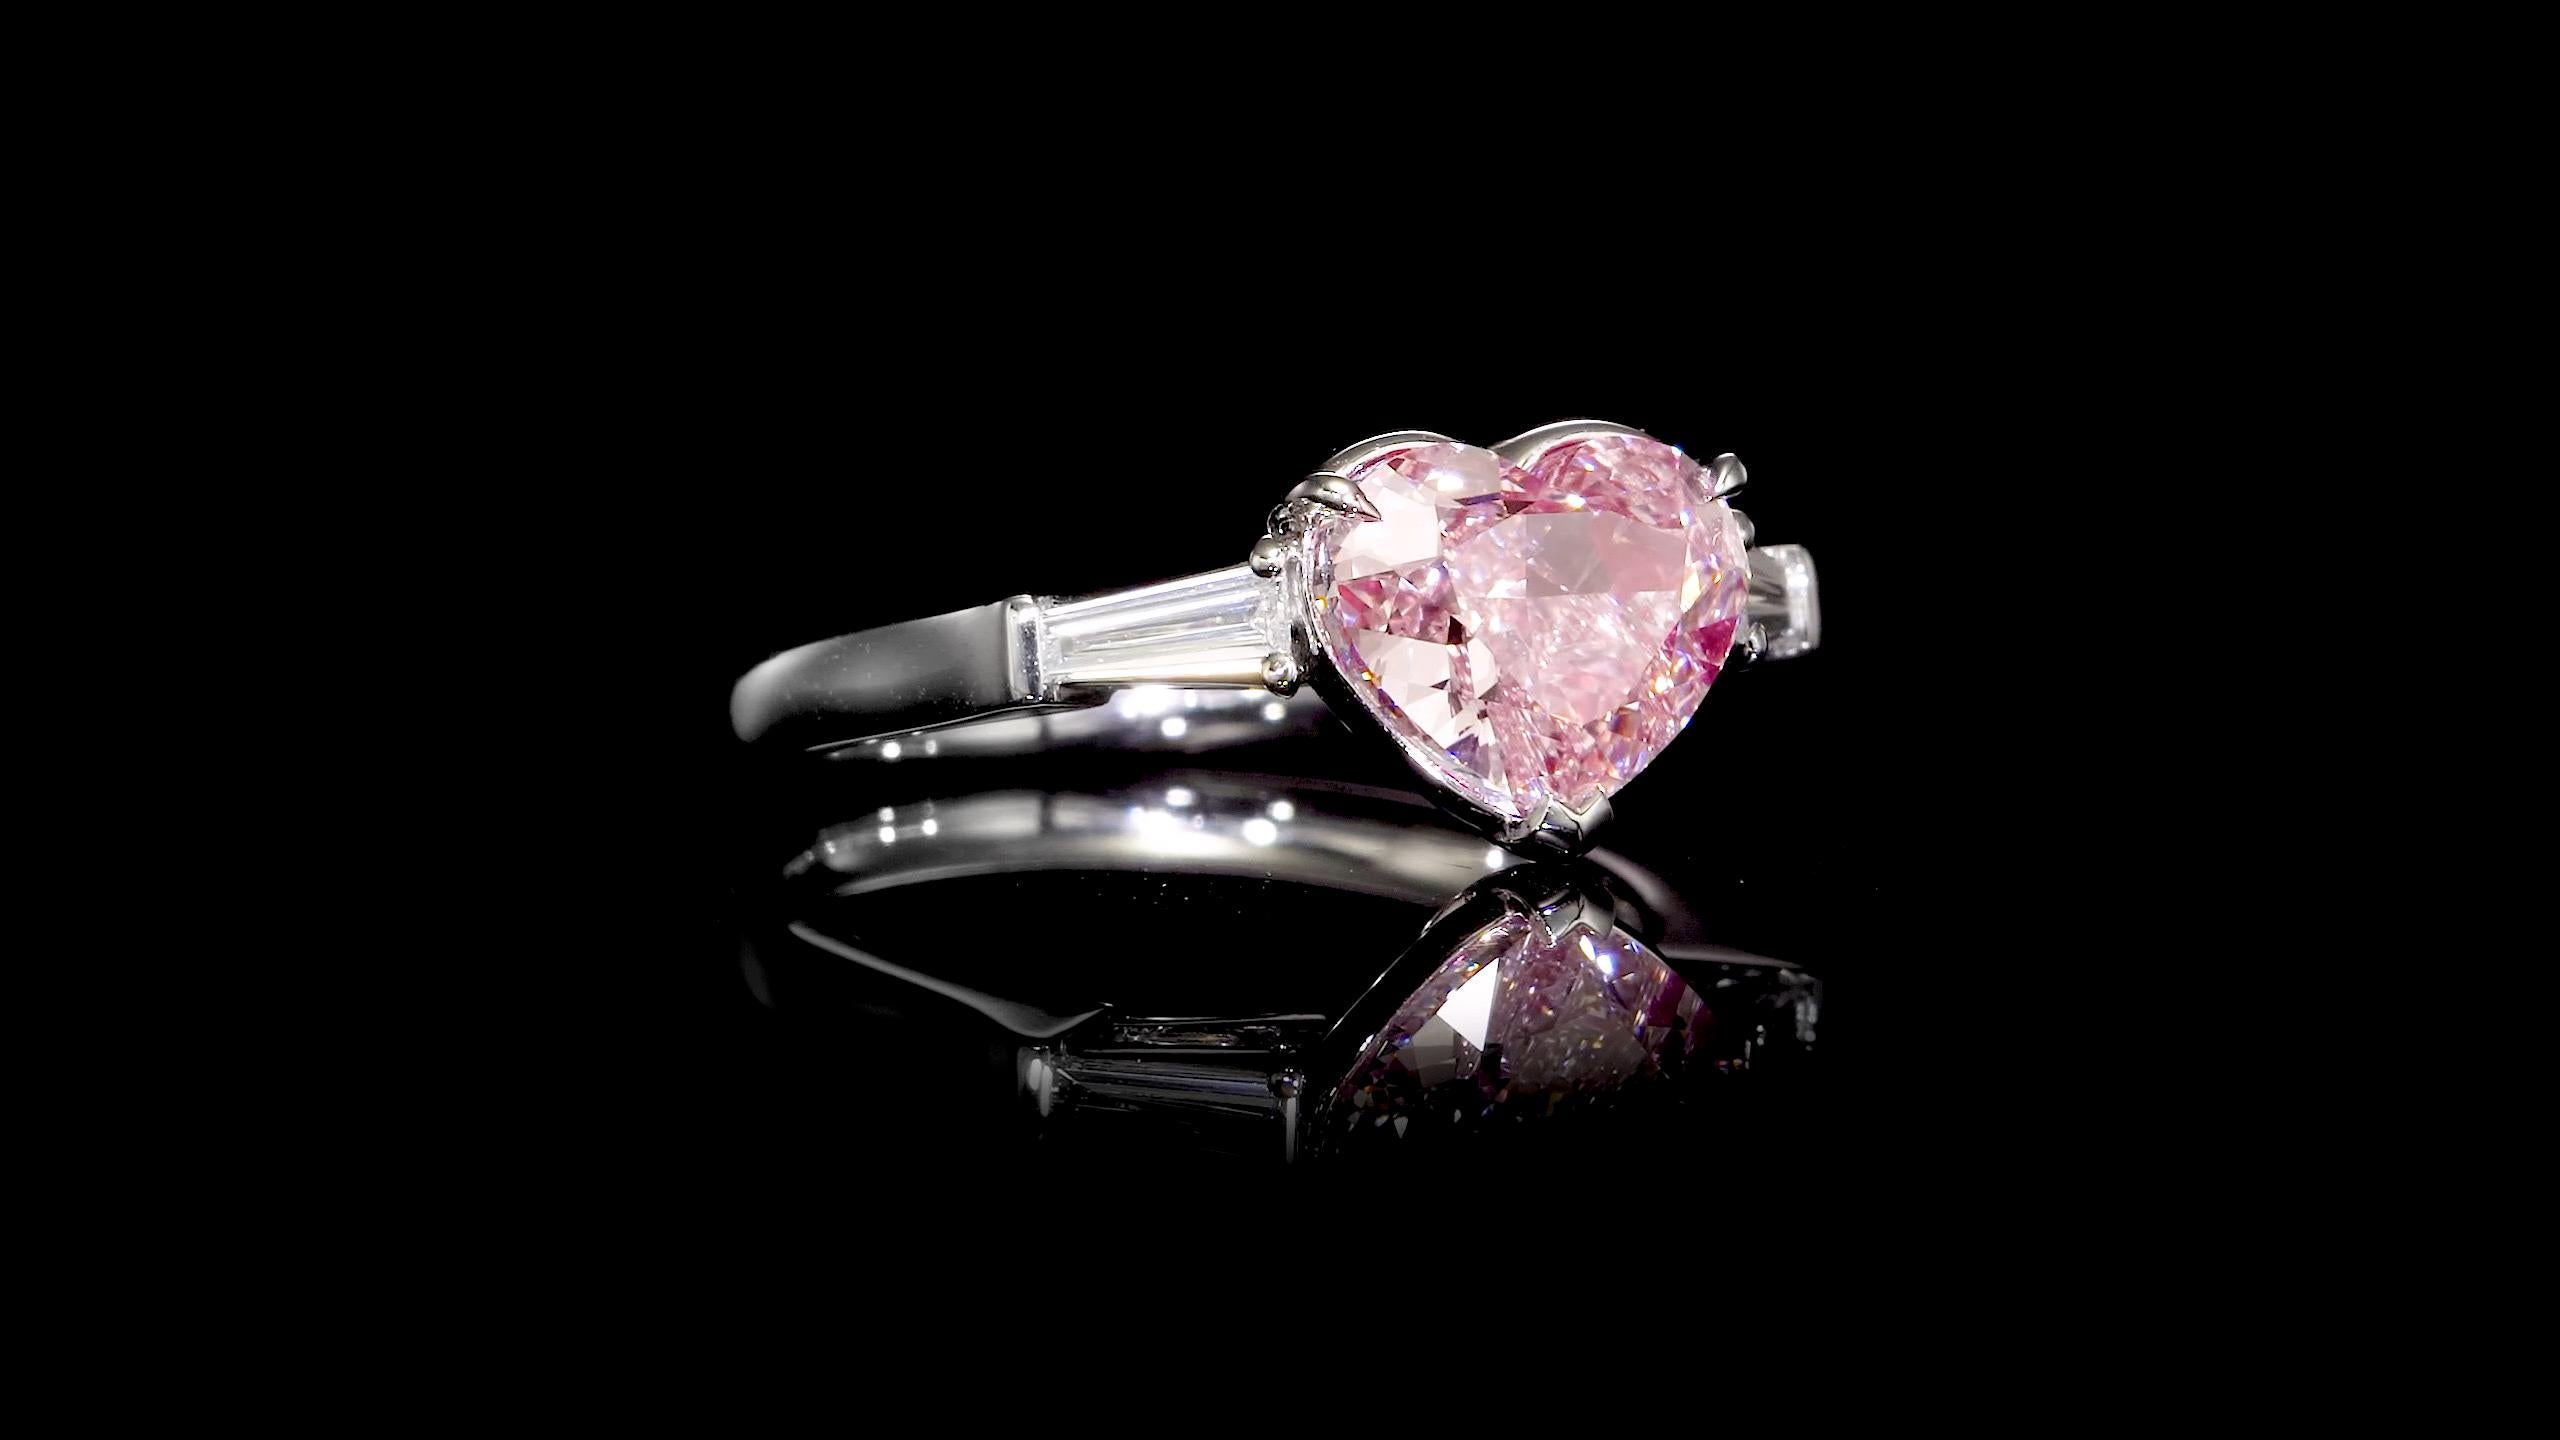 Another hand made masterpiece from the Museum Vault At Emilio Jewelry, located on New York's iconic Fifth Avenue. Featuring a very unique Gia certified natural fancy light pink center diamond weighing over 3 carats alone. With our expertise this